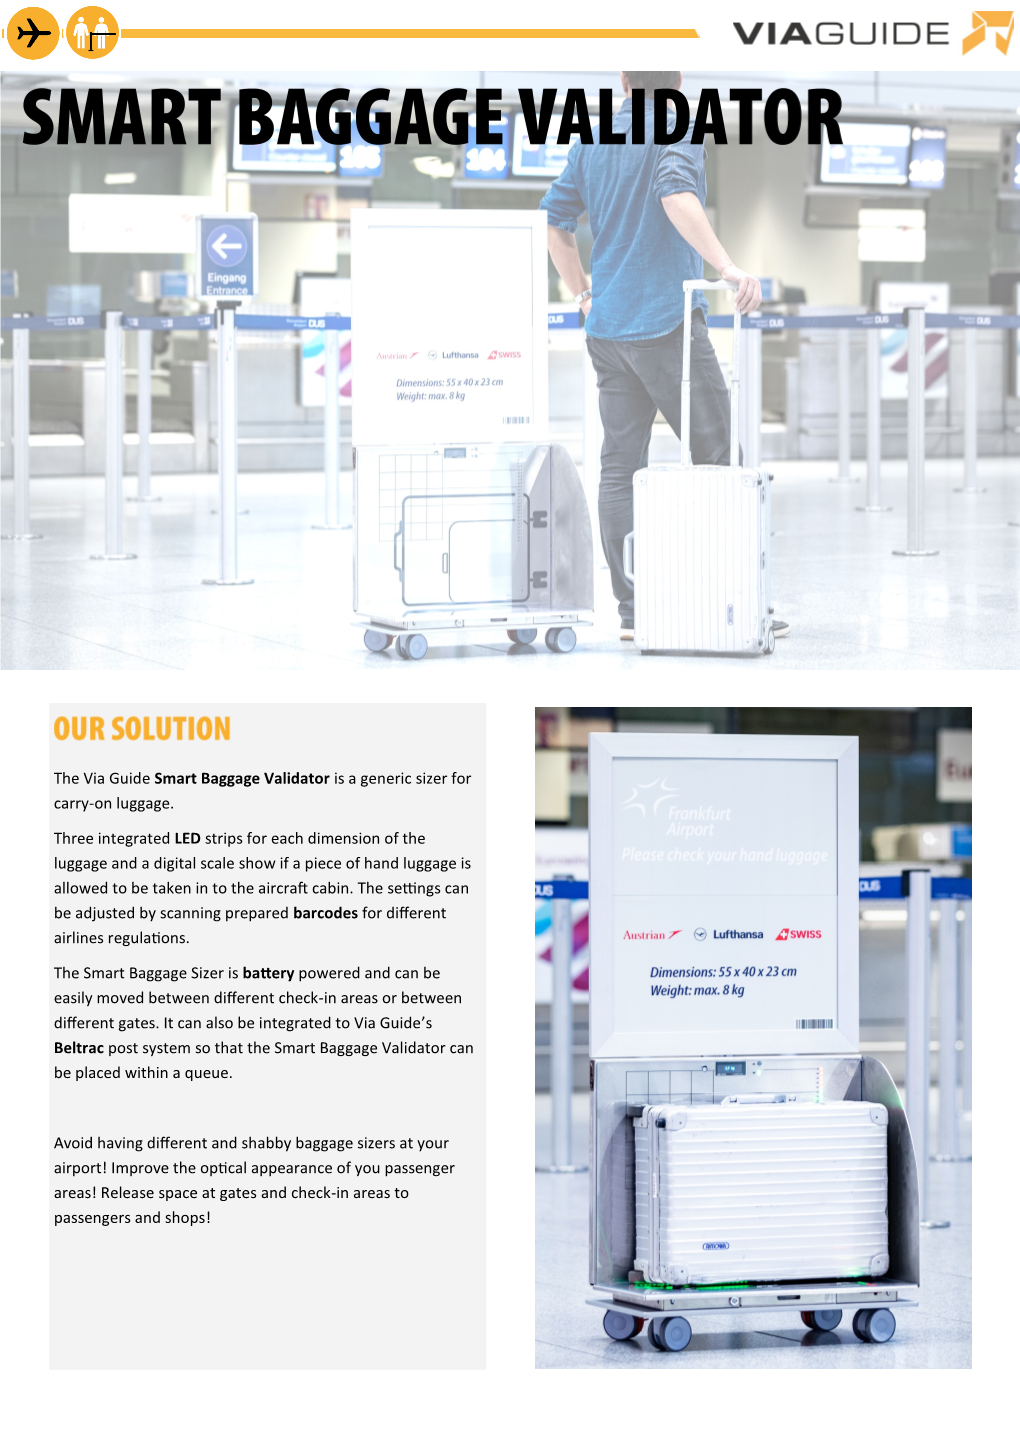 The Via Guide Smart Baggage Validator Is a Generic Sizer for Carry-On Luggage